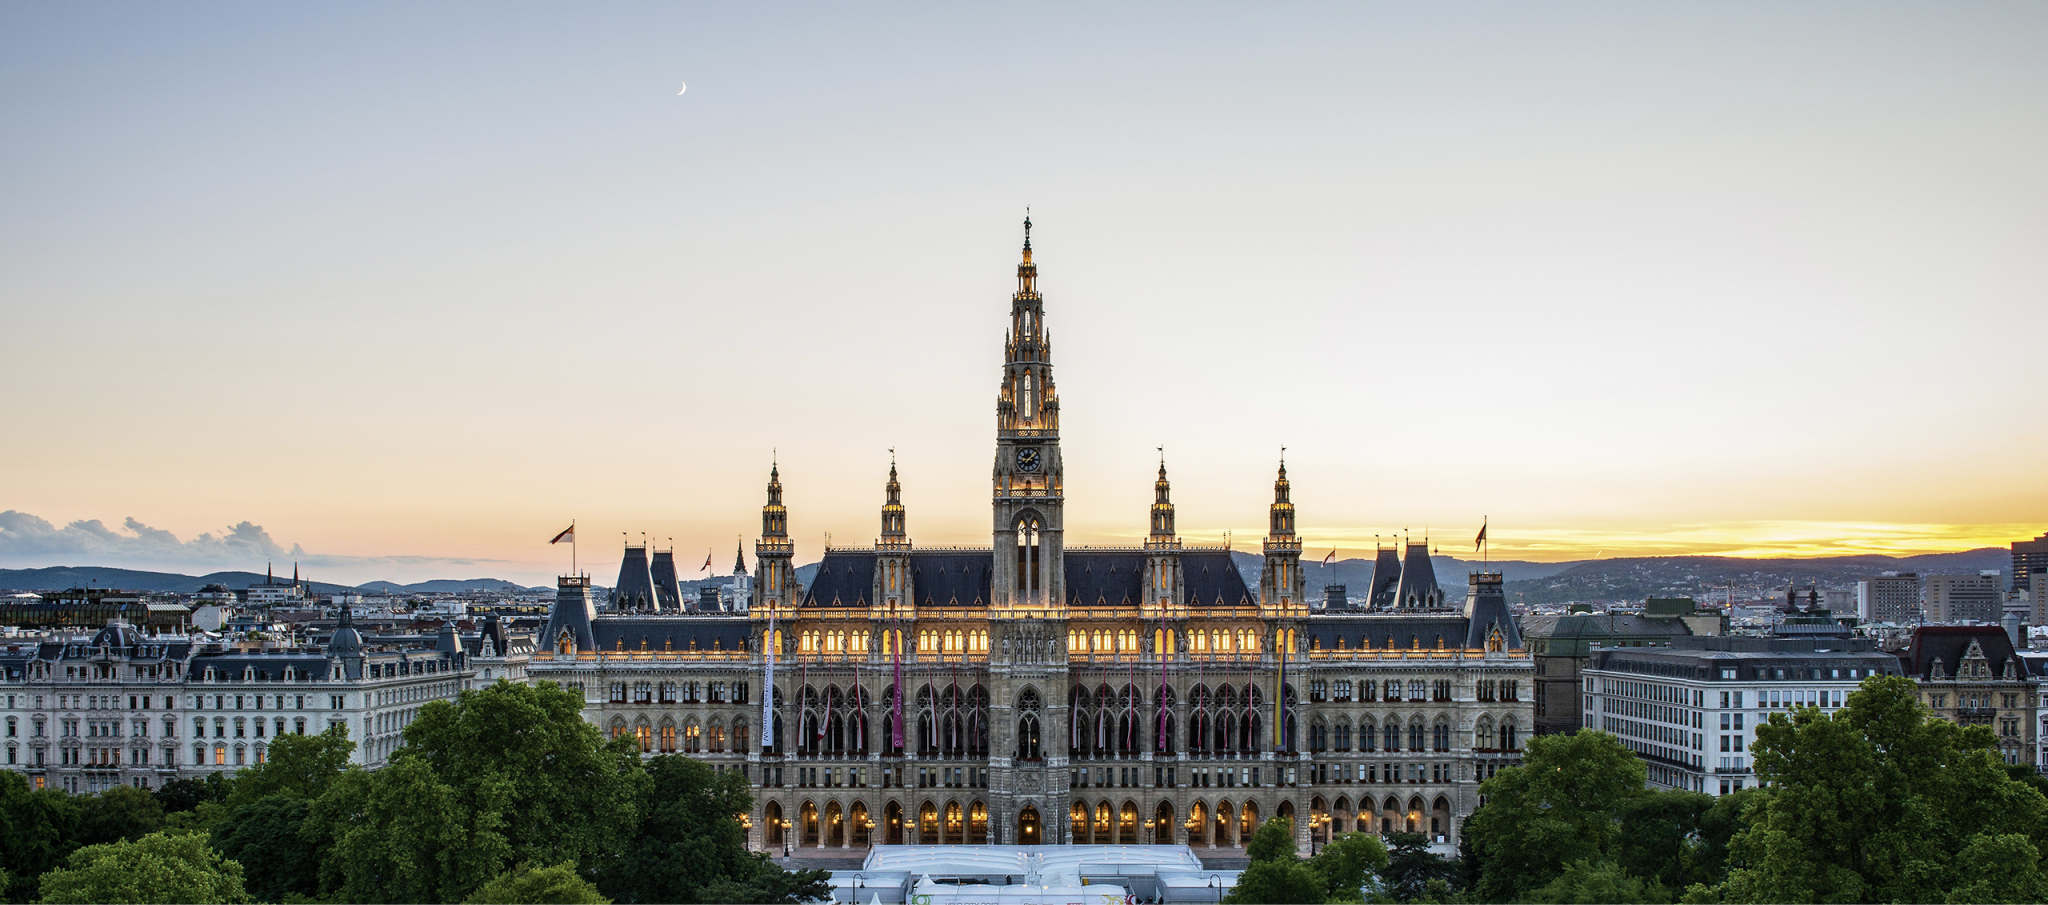 View of the city hall of Vienna in the evening.